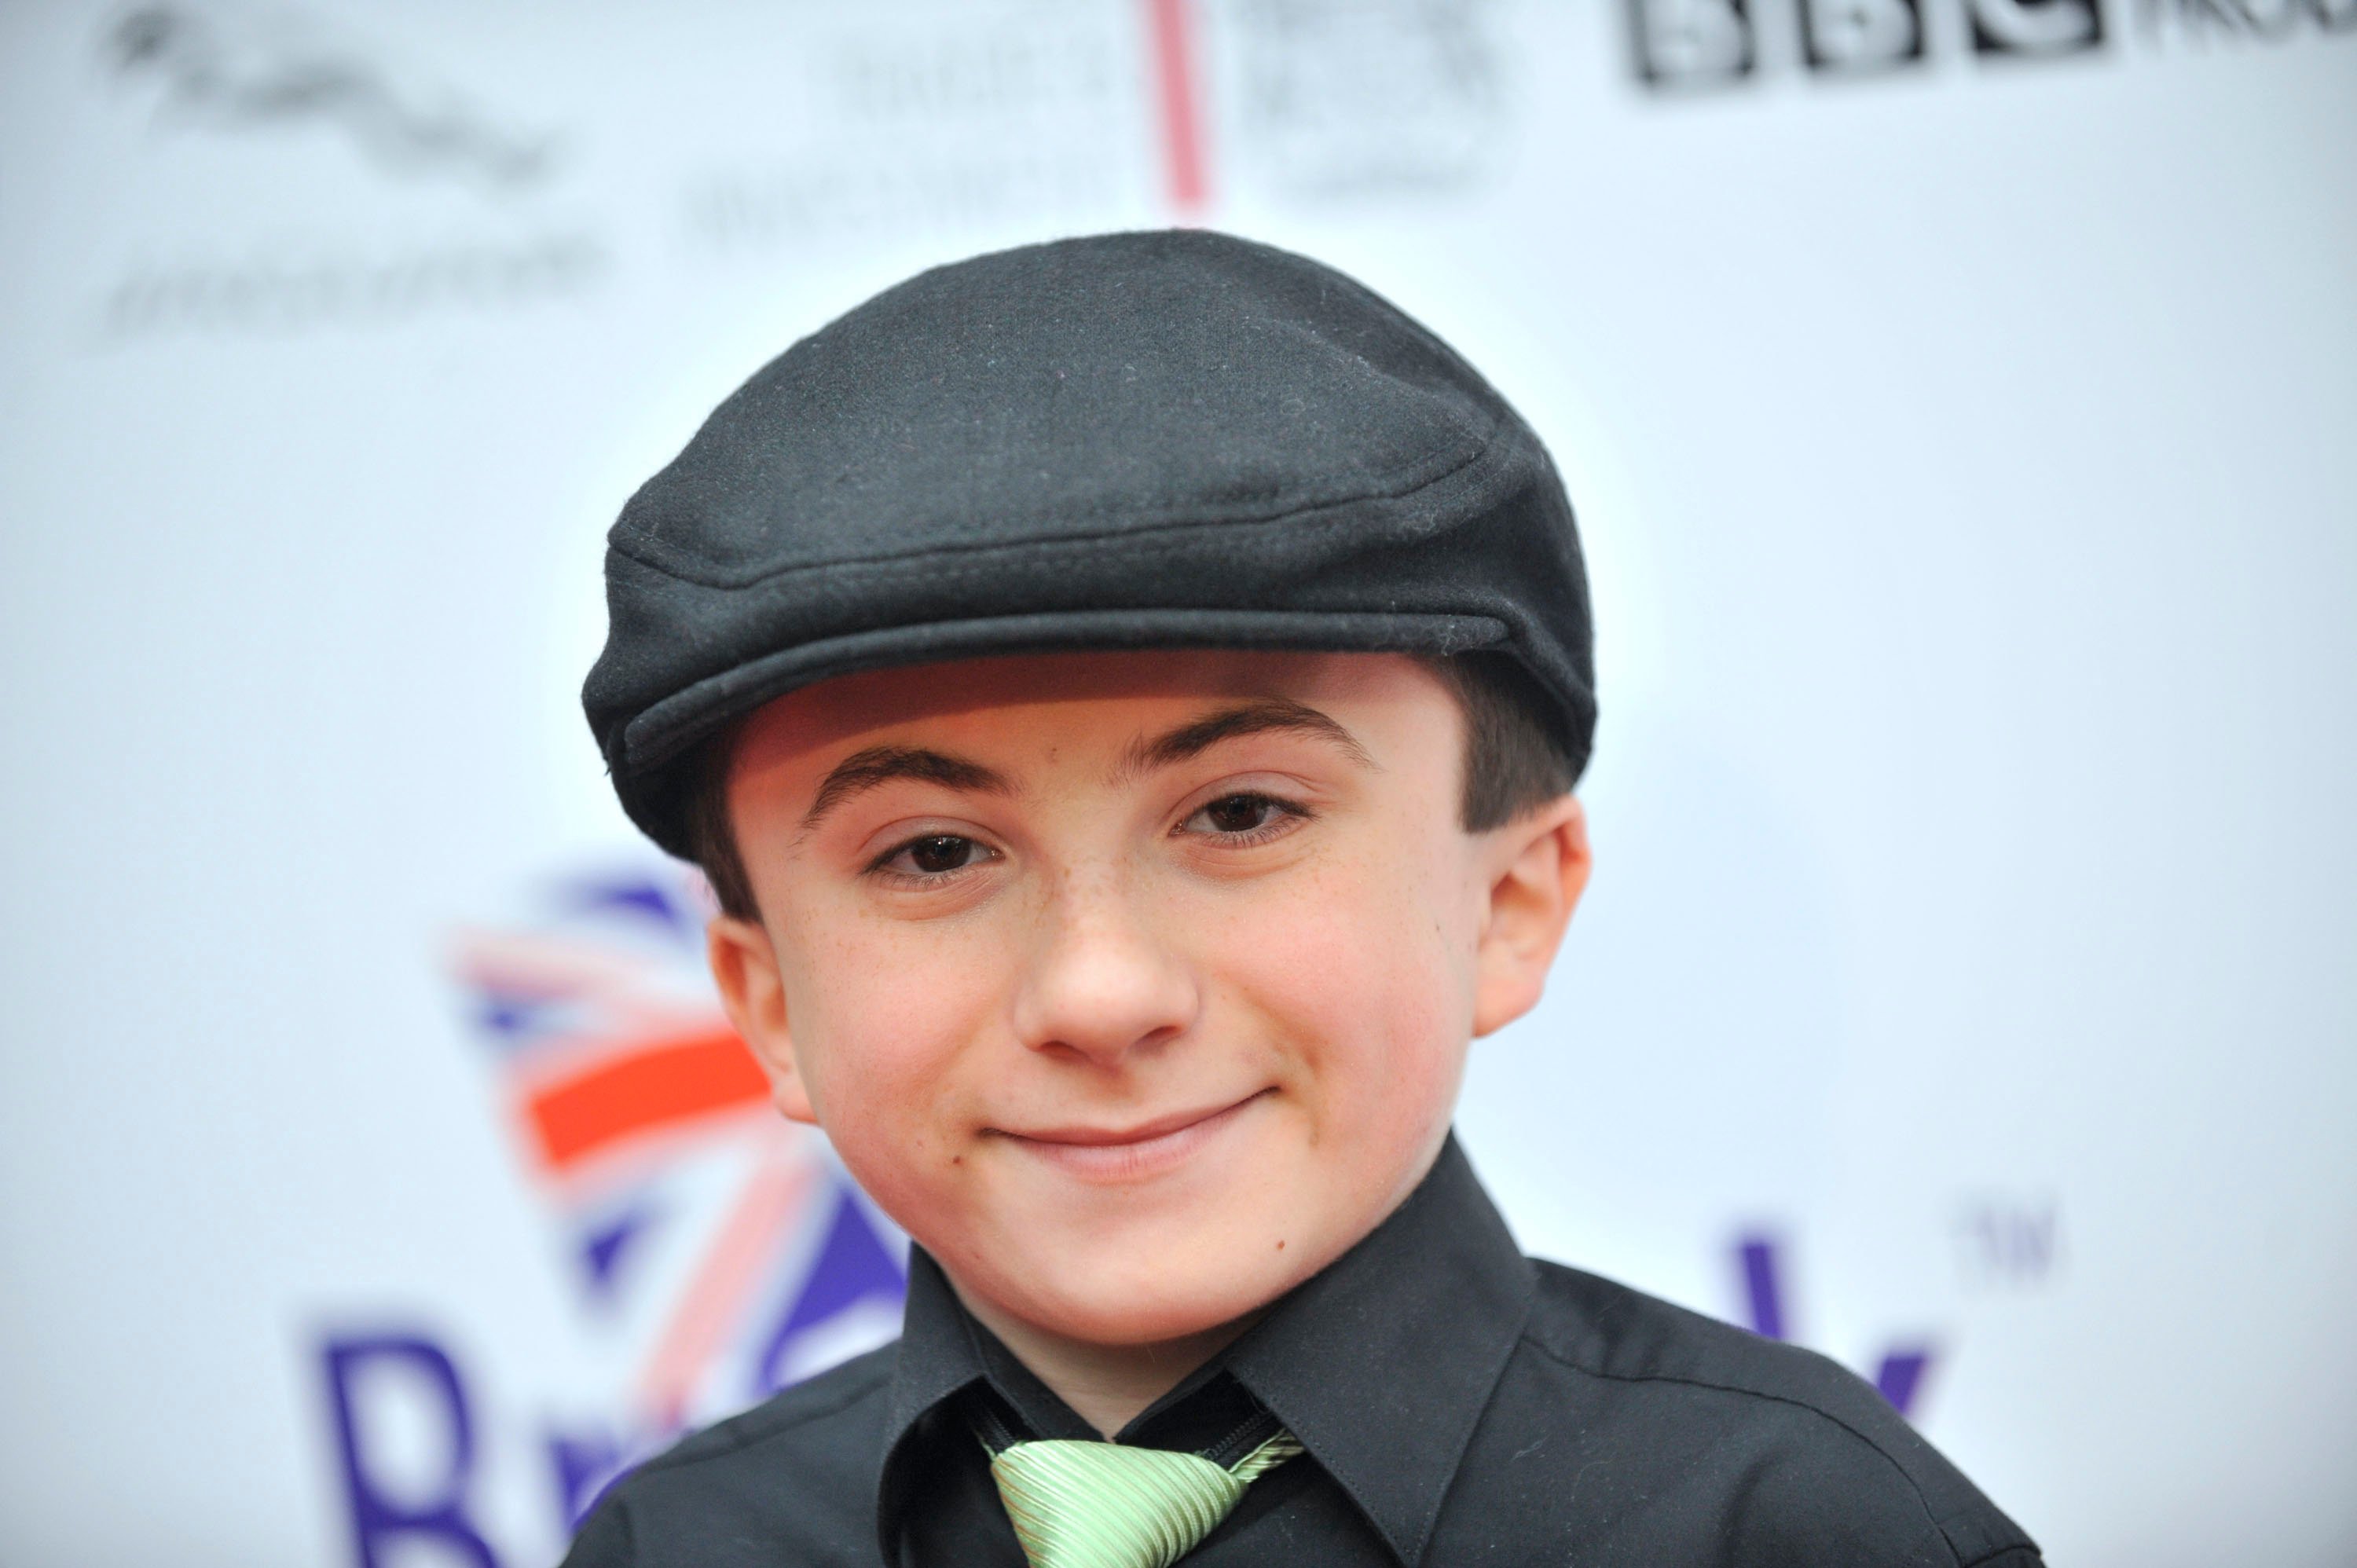 Atticus Shaffer of 'The Middle'